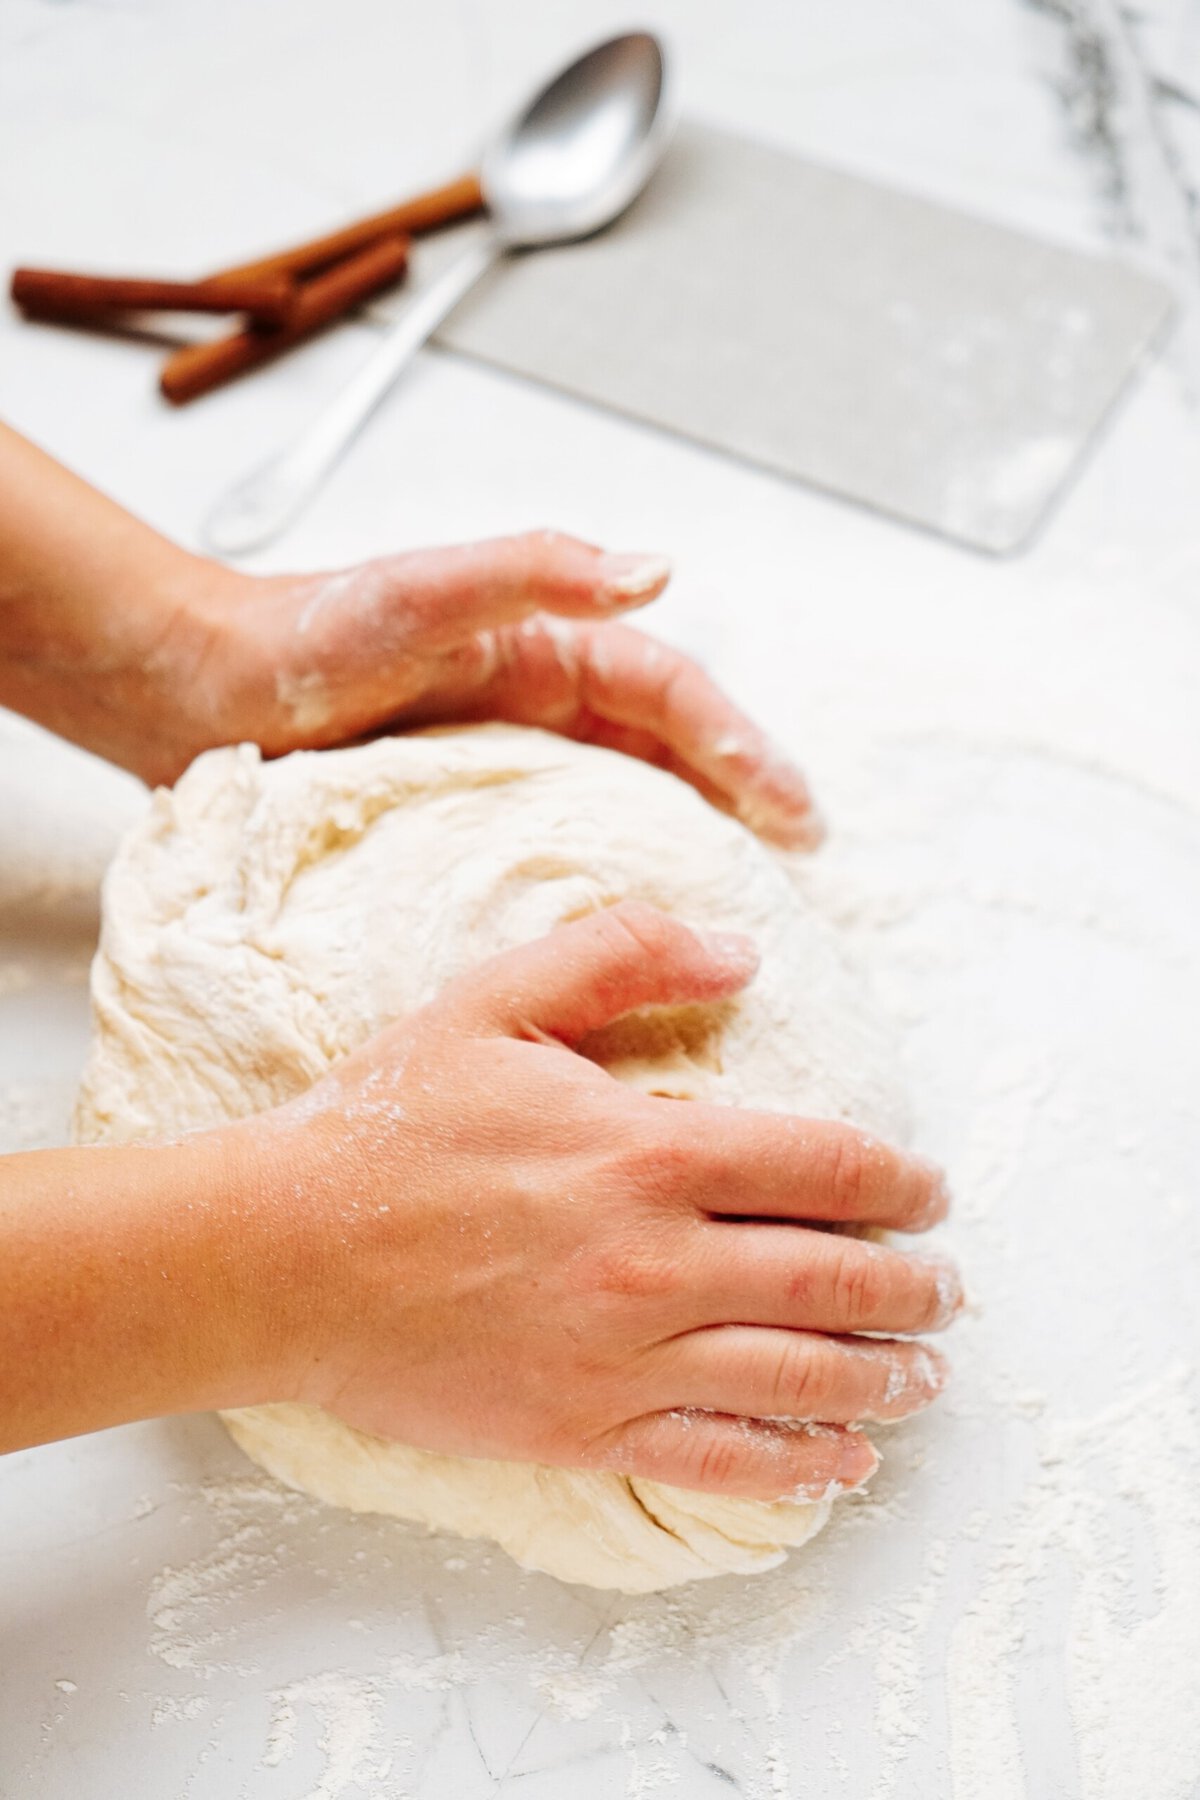 Hands kneading a ball of dough on a floured surface, preparing for delicious cinnamon rolls, with a spoon, cutting board, and cinnamon sticks in the background.